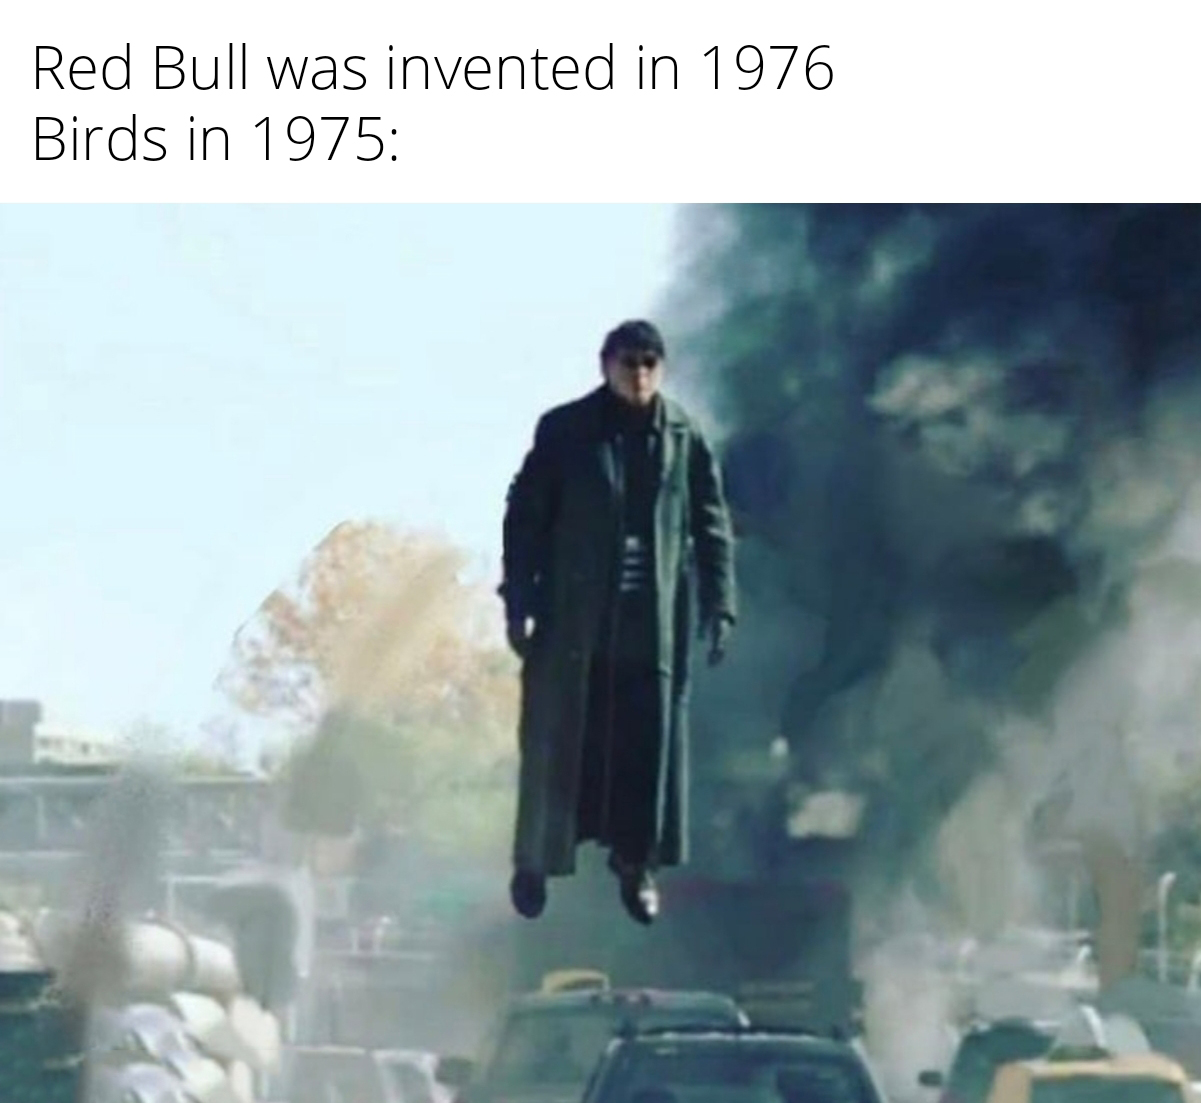 doc ock floating meme - Red Bull was invented in 1976 Birds in 1975